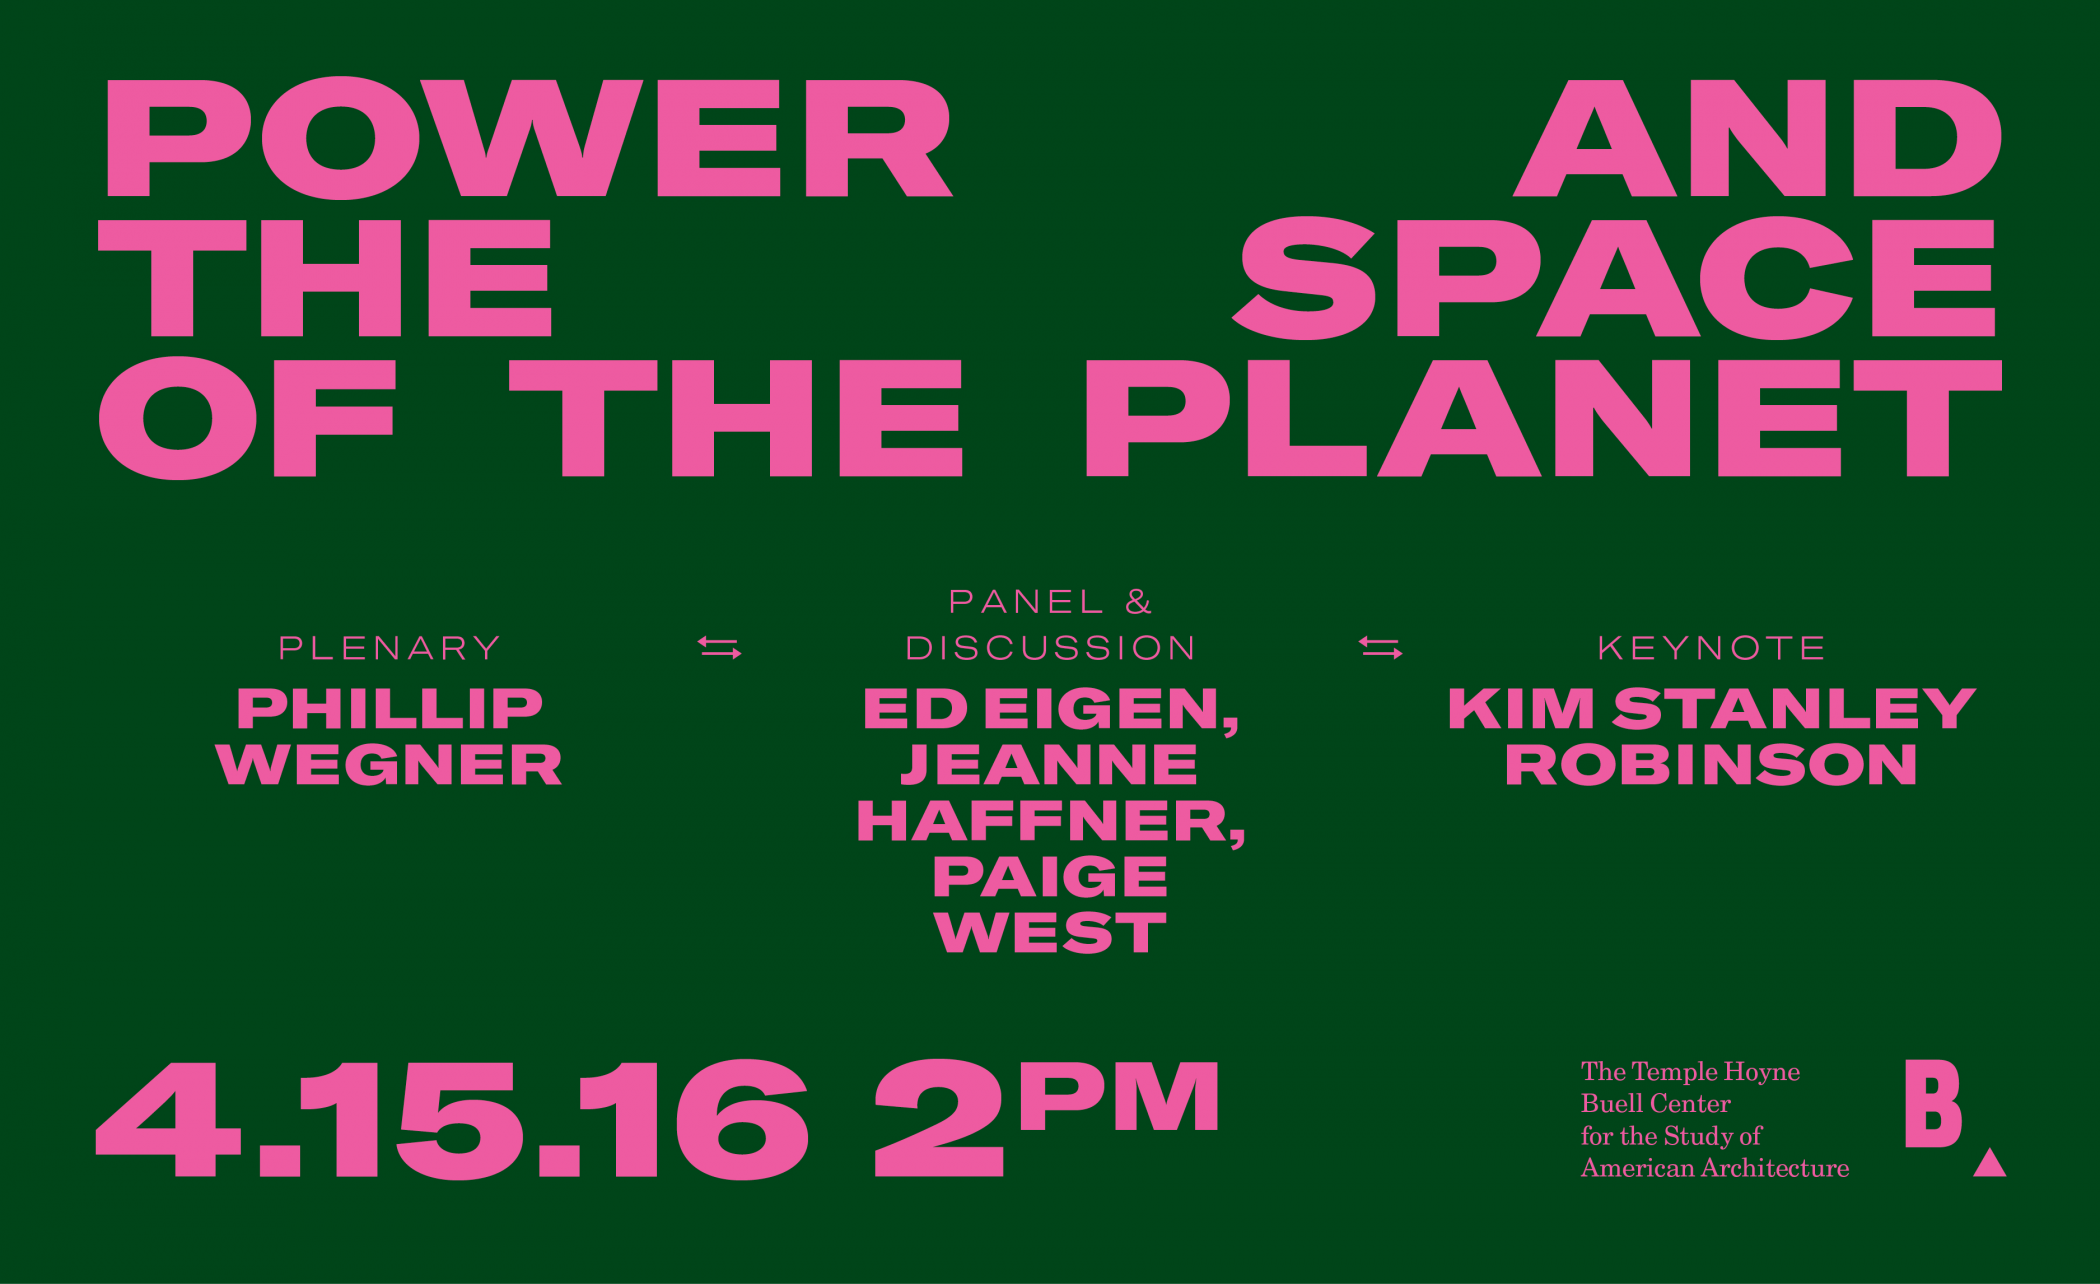 Pink bold capitalized text on a dark green background reads "POWER AND SPACE OF THE PLANET" and includes information about time, location, and participants of the event